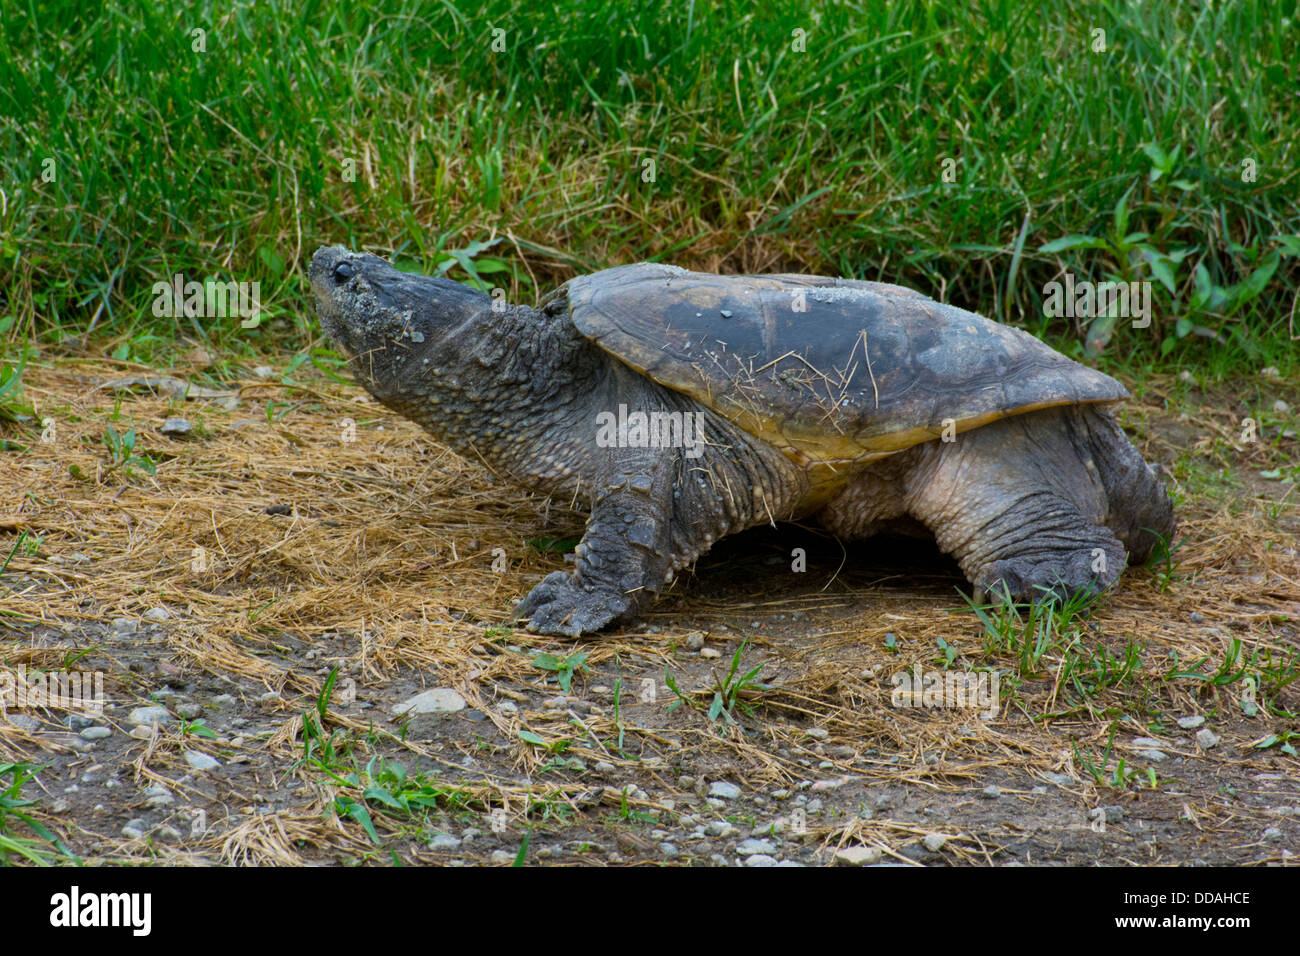 A Common Snapping Turtle. Stock Photo